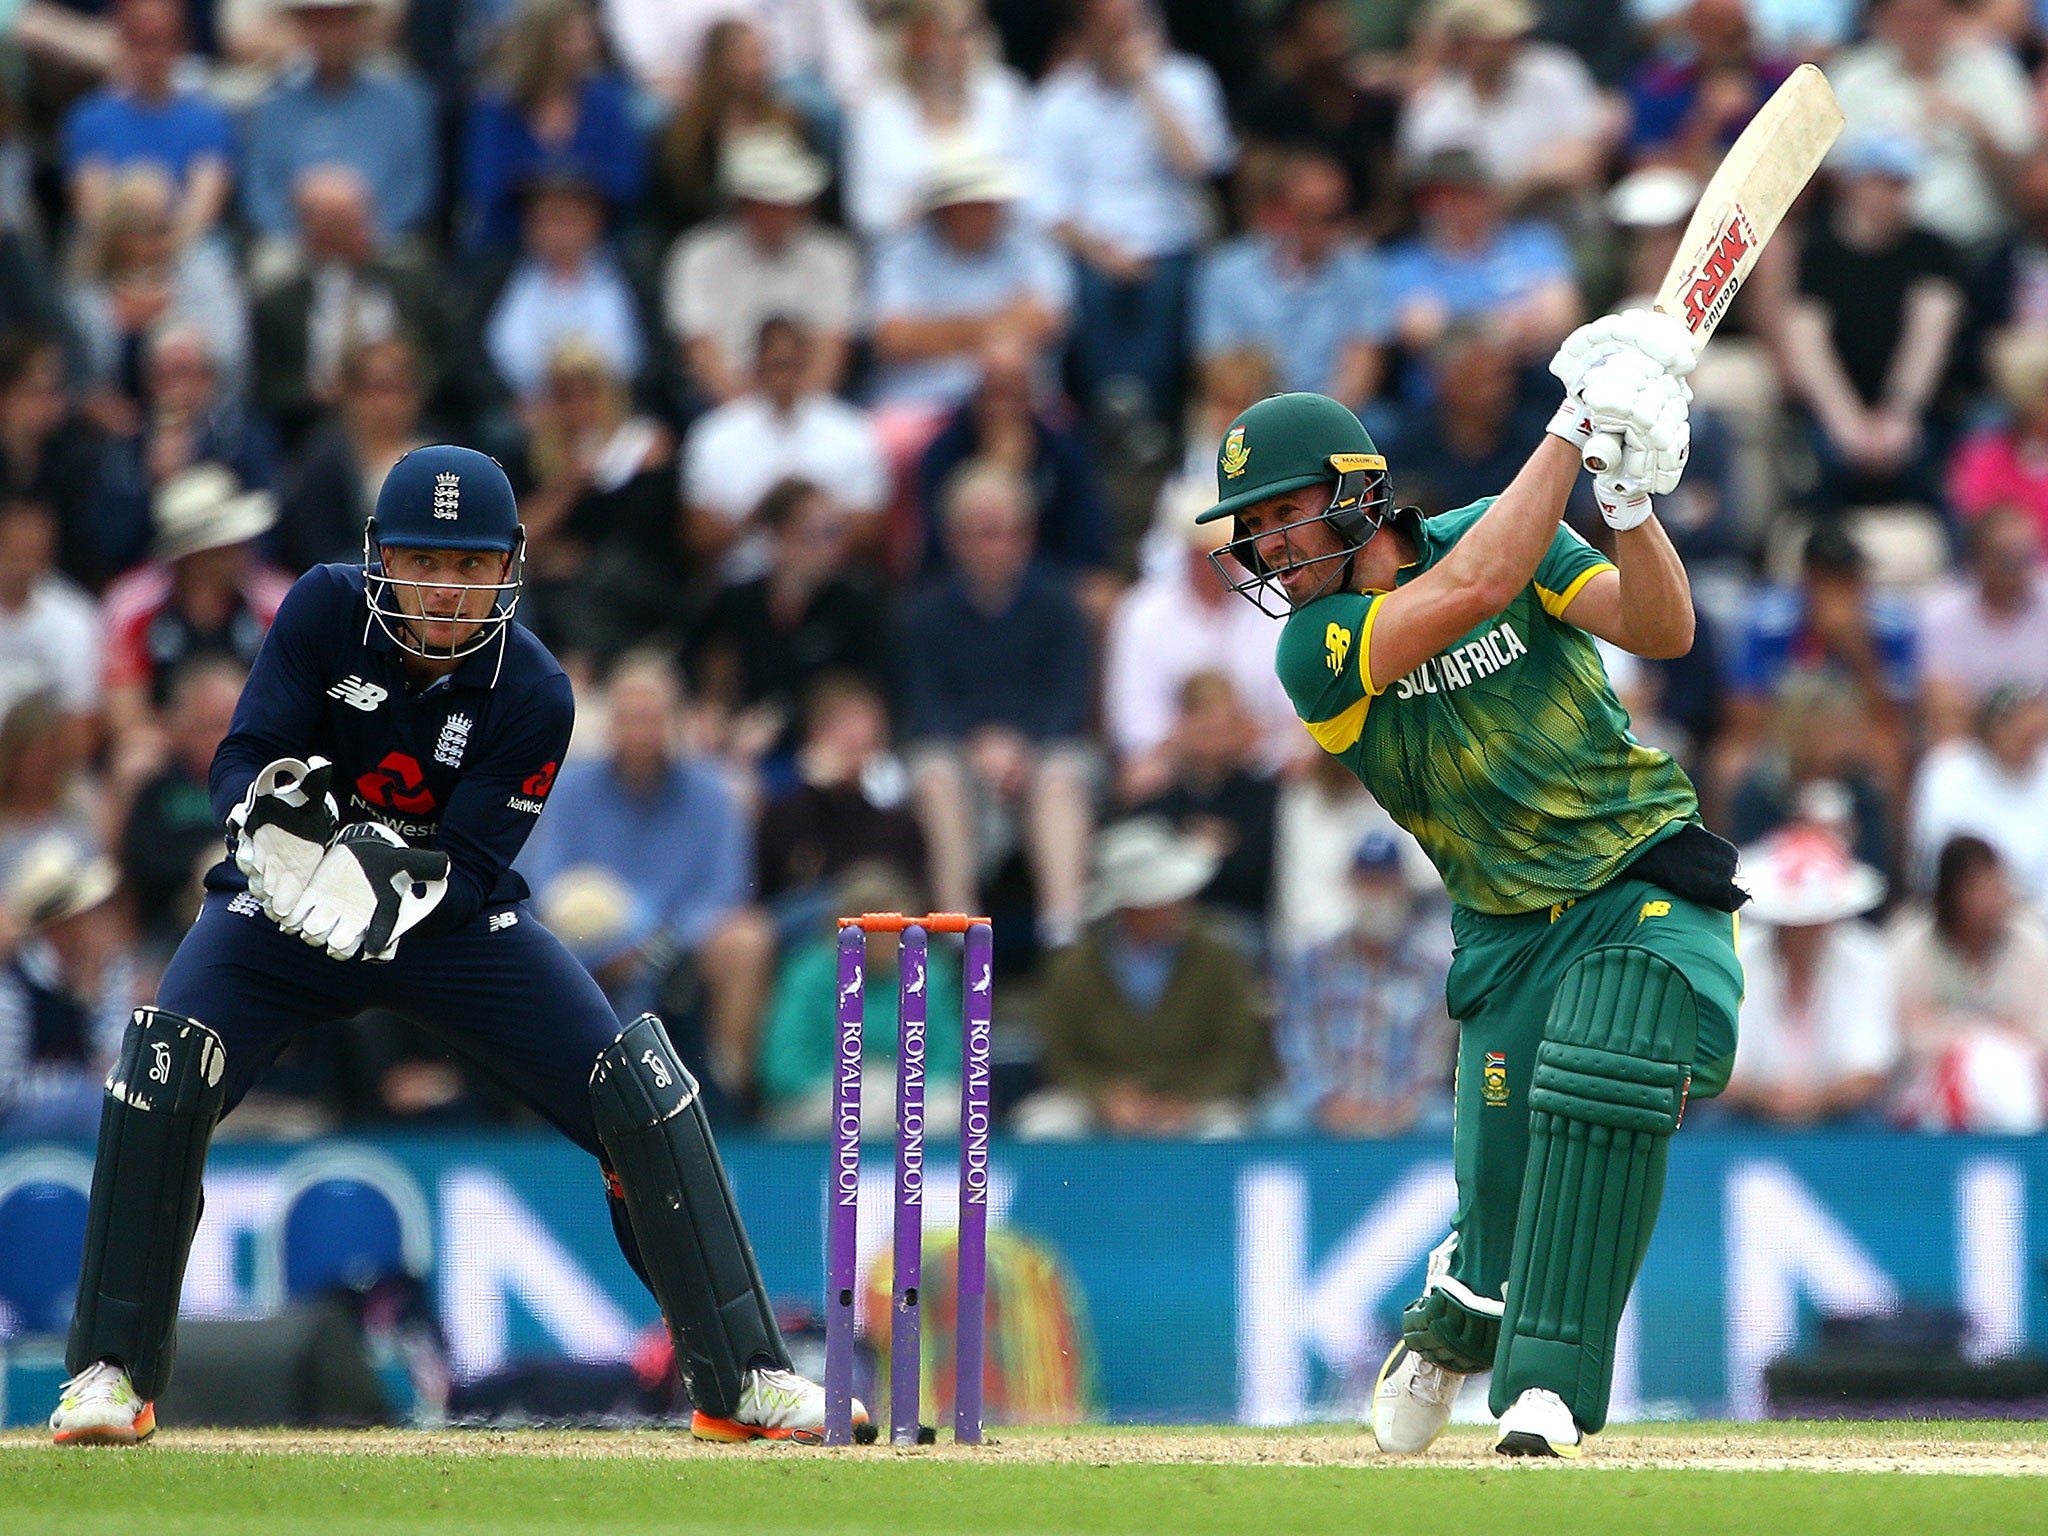 De Villiers in action for South Africa